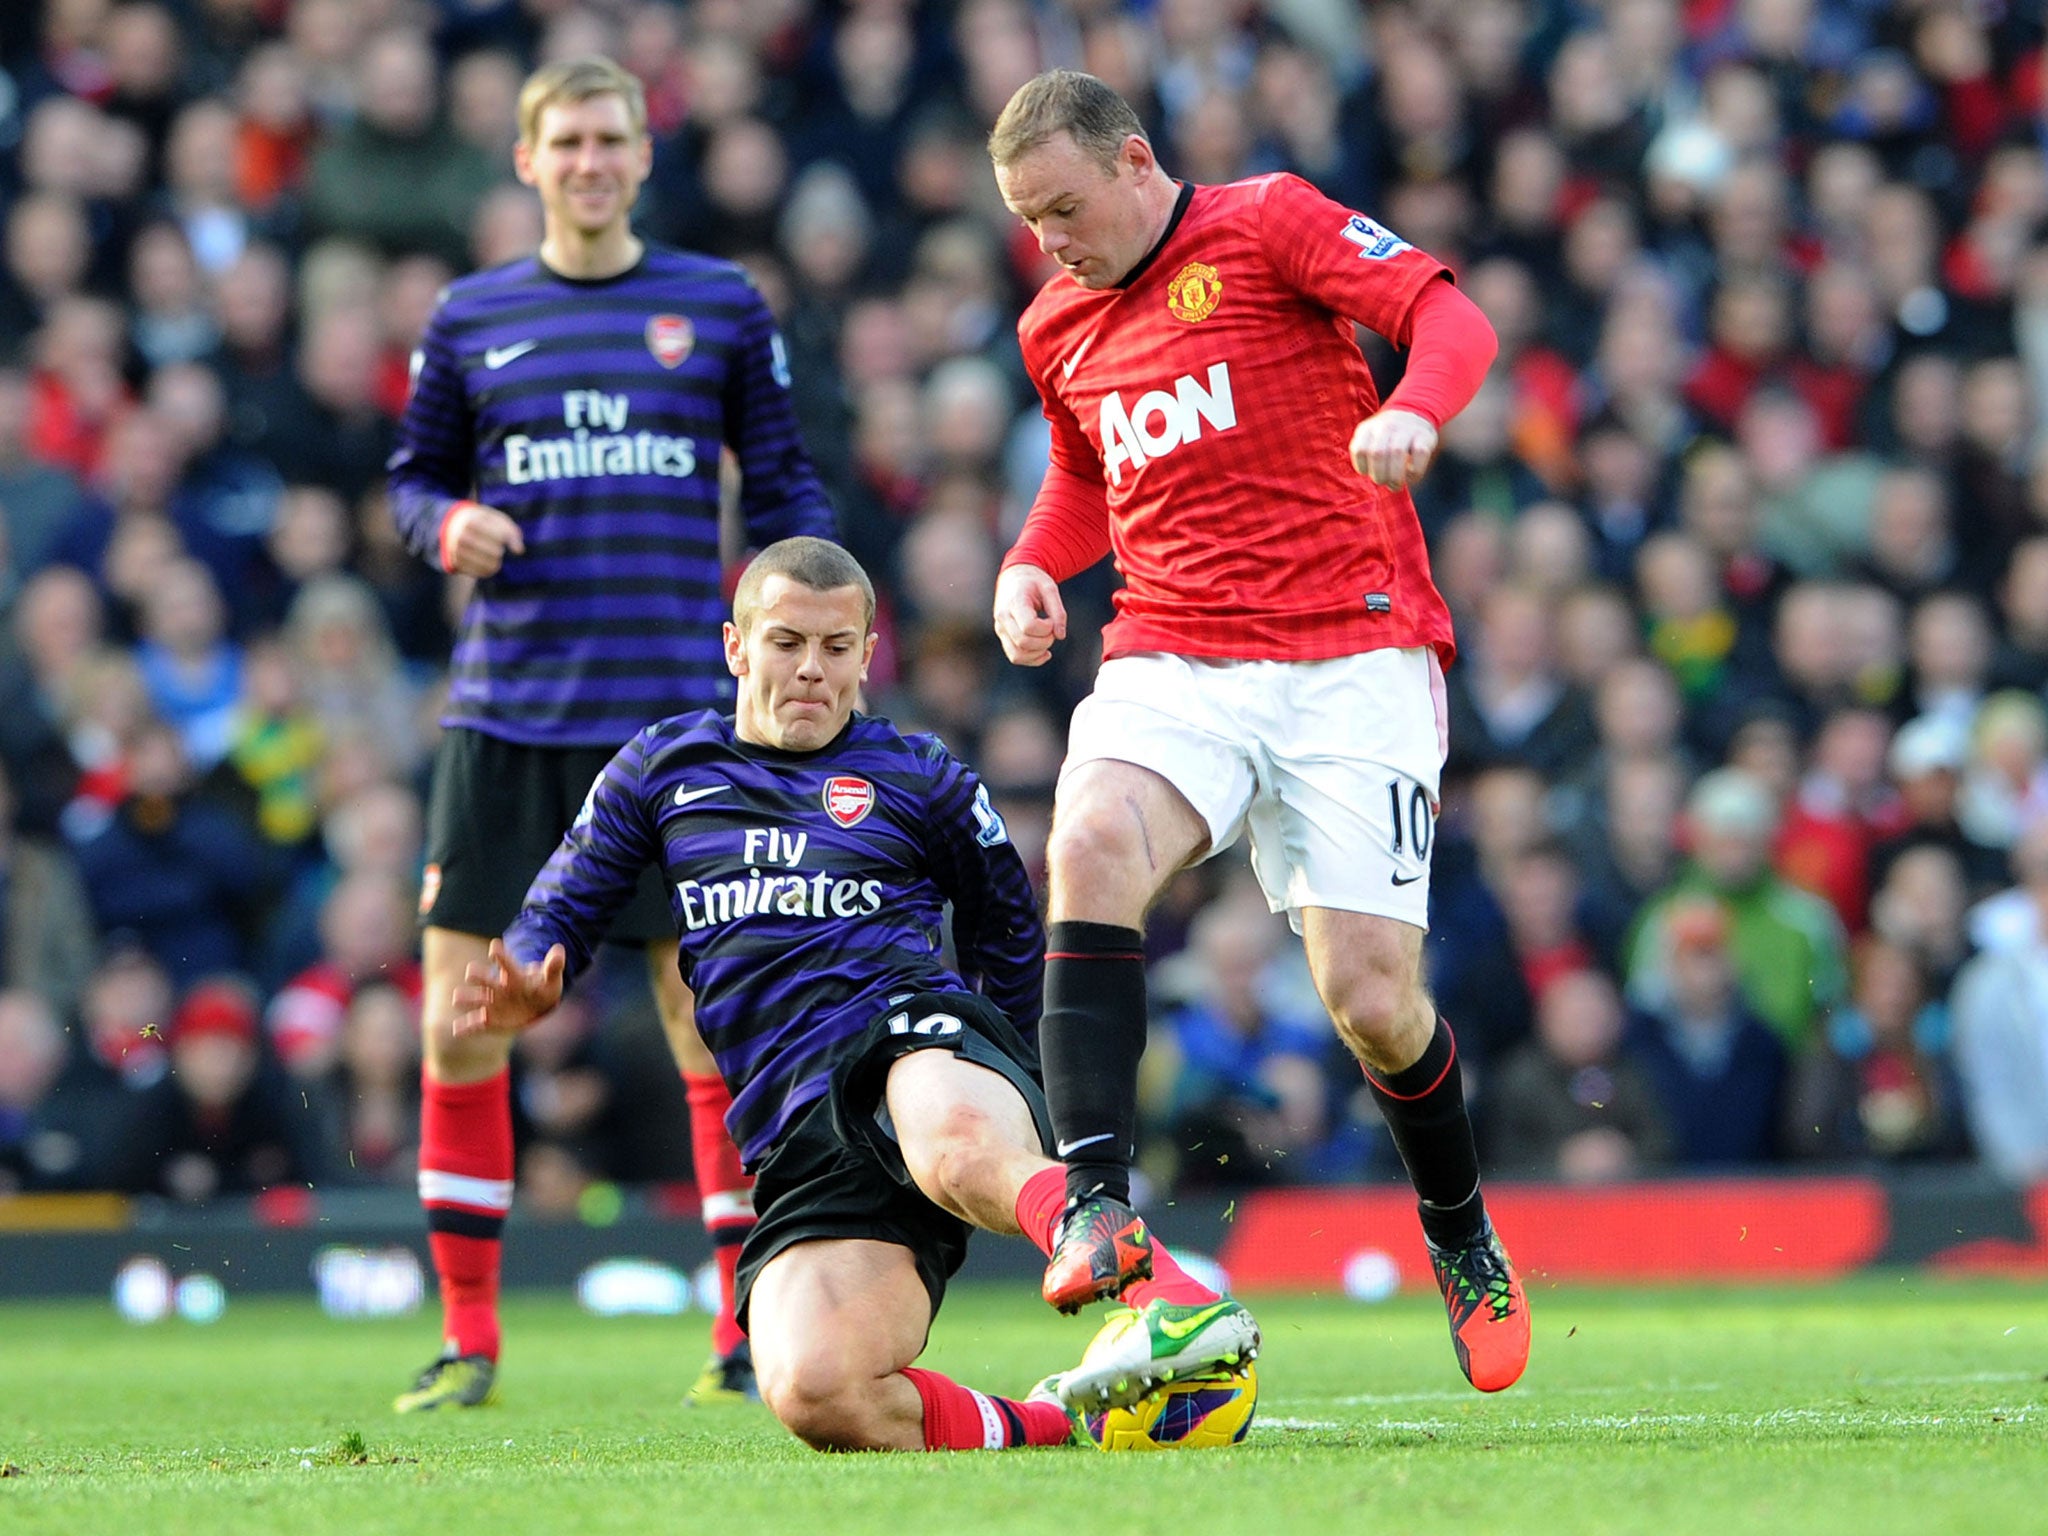 Wayne Rooney has a fine record against Arsenal